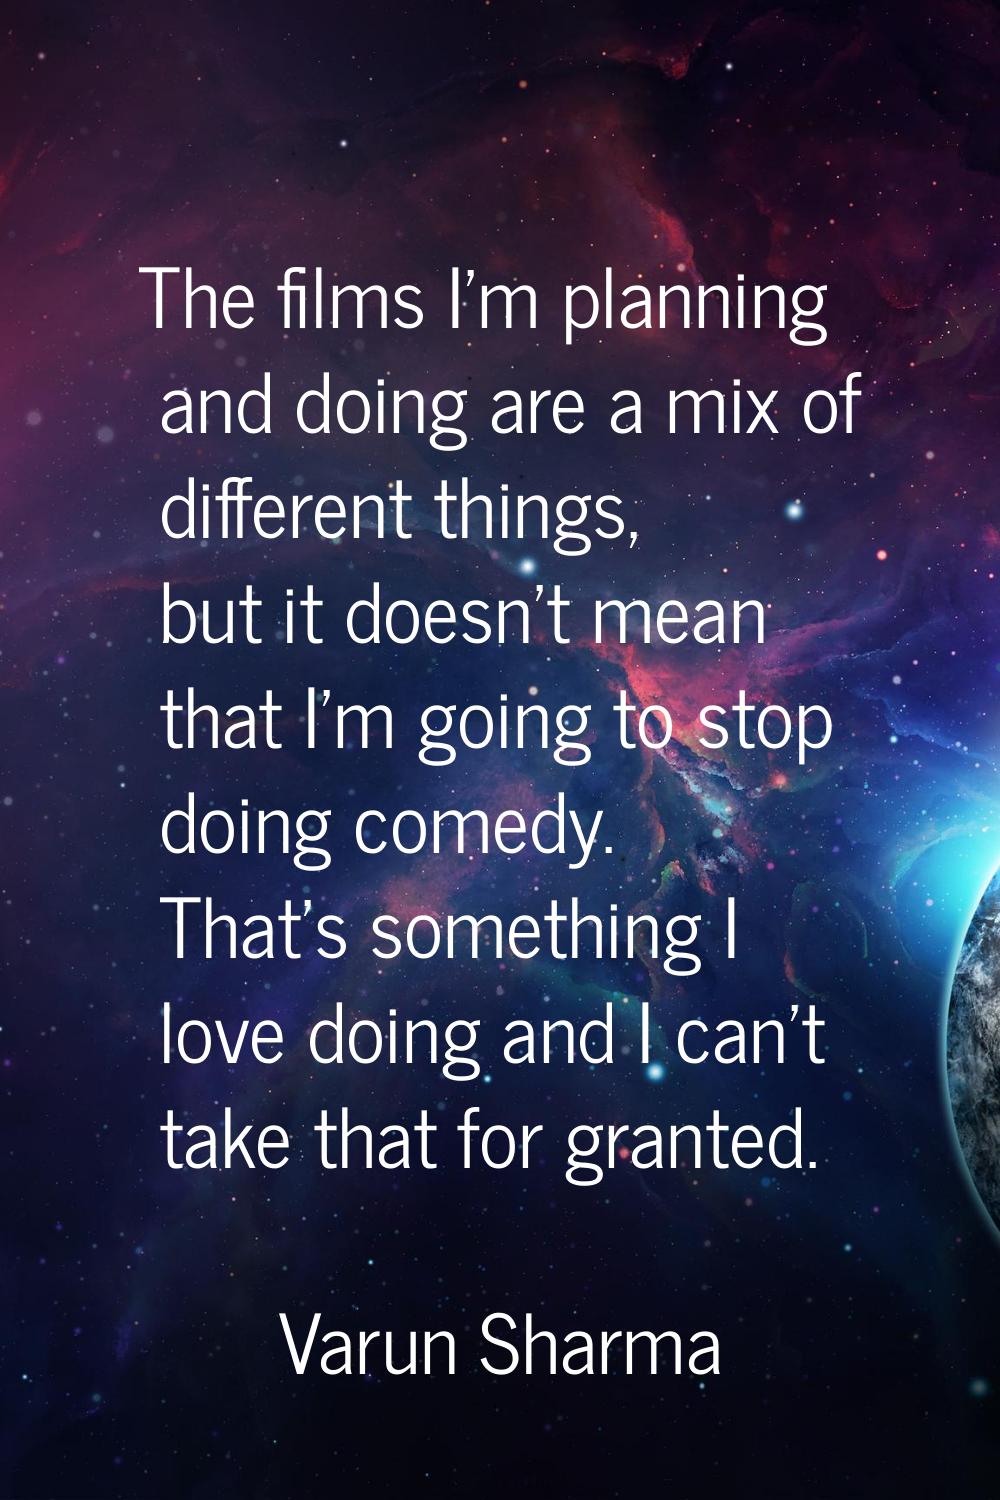 The films I'm planning and doing are a mix of different things, but it doesn't mean that I'm going 